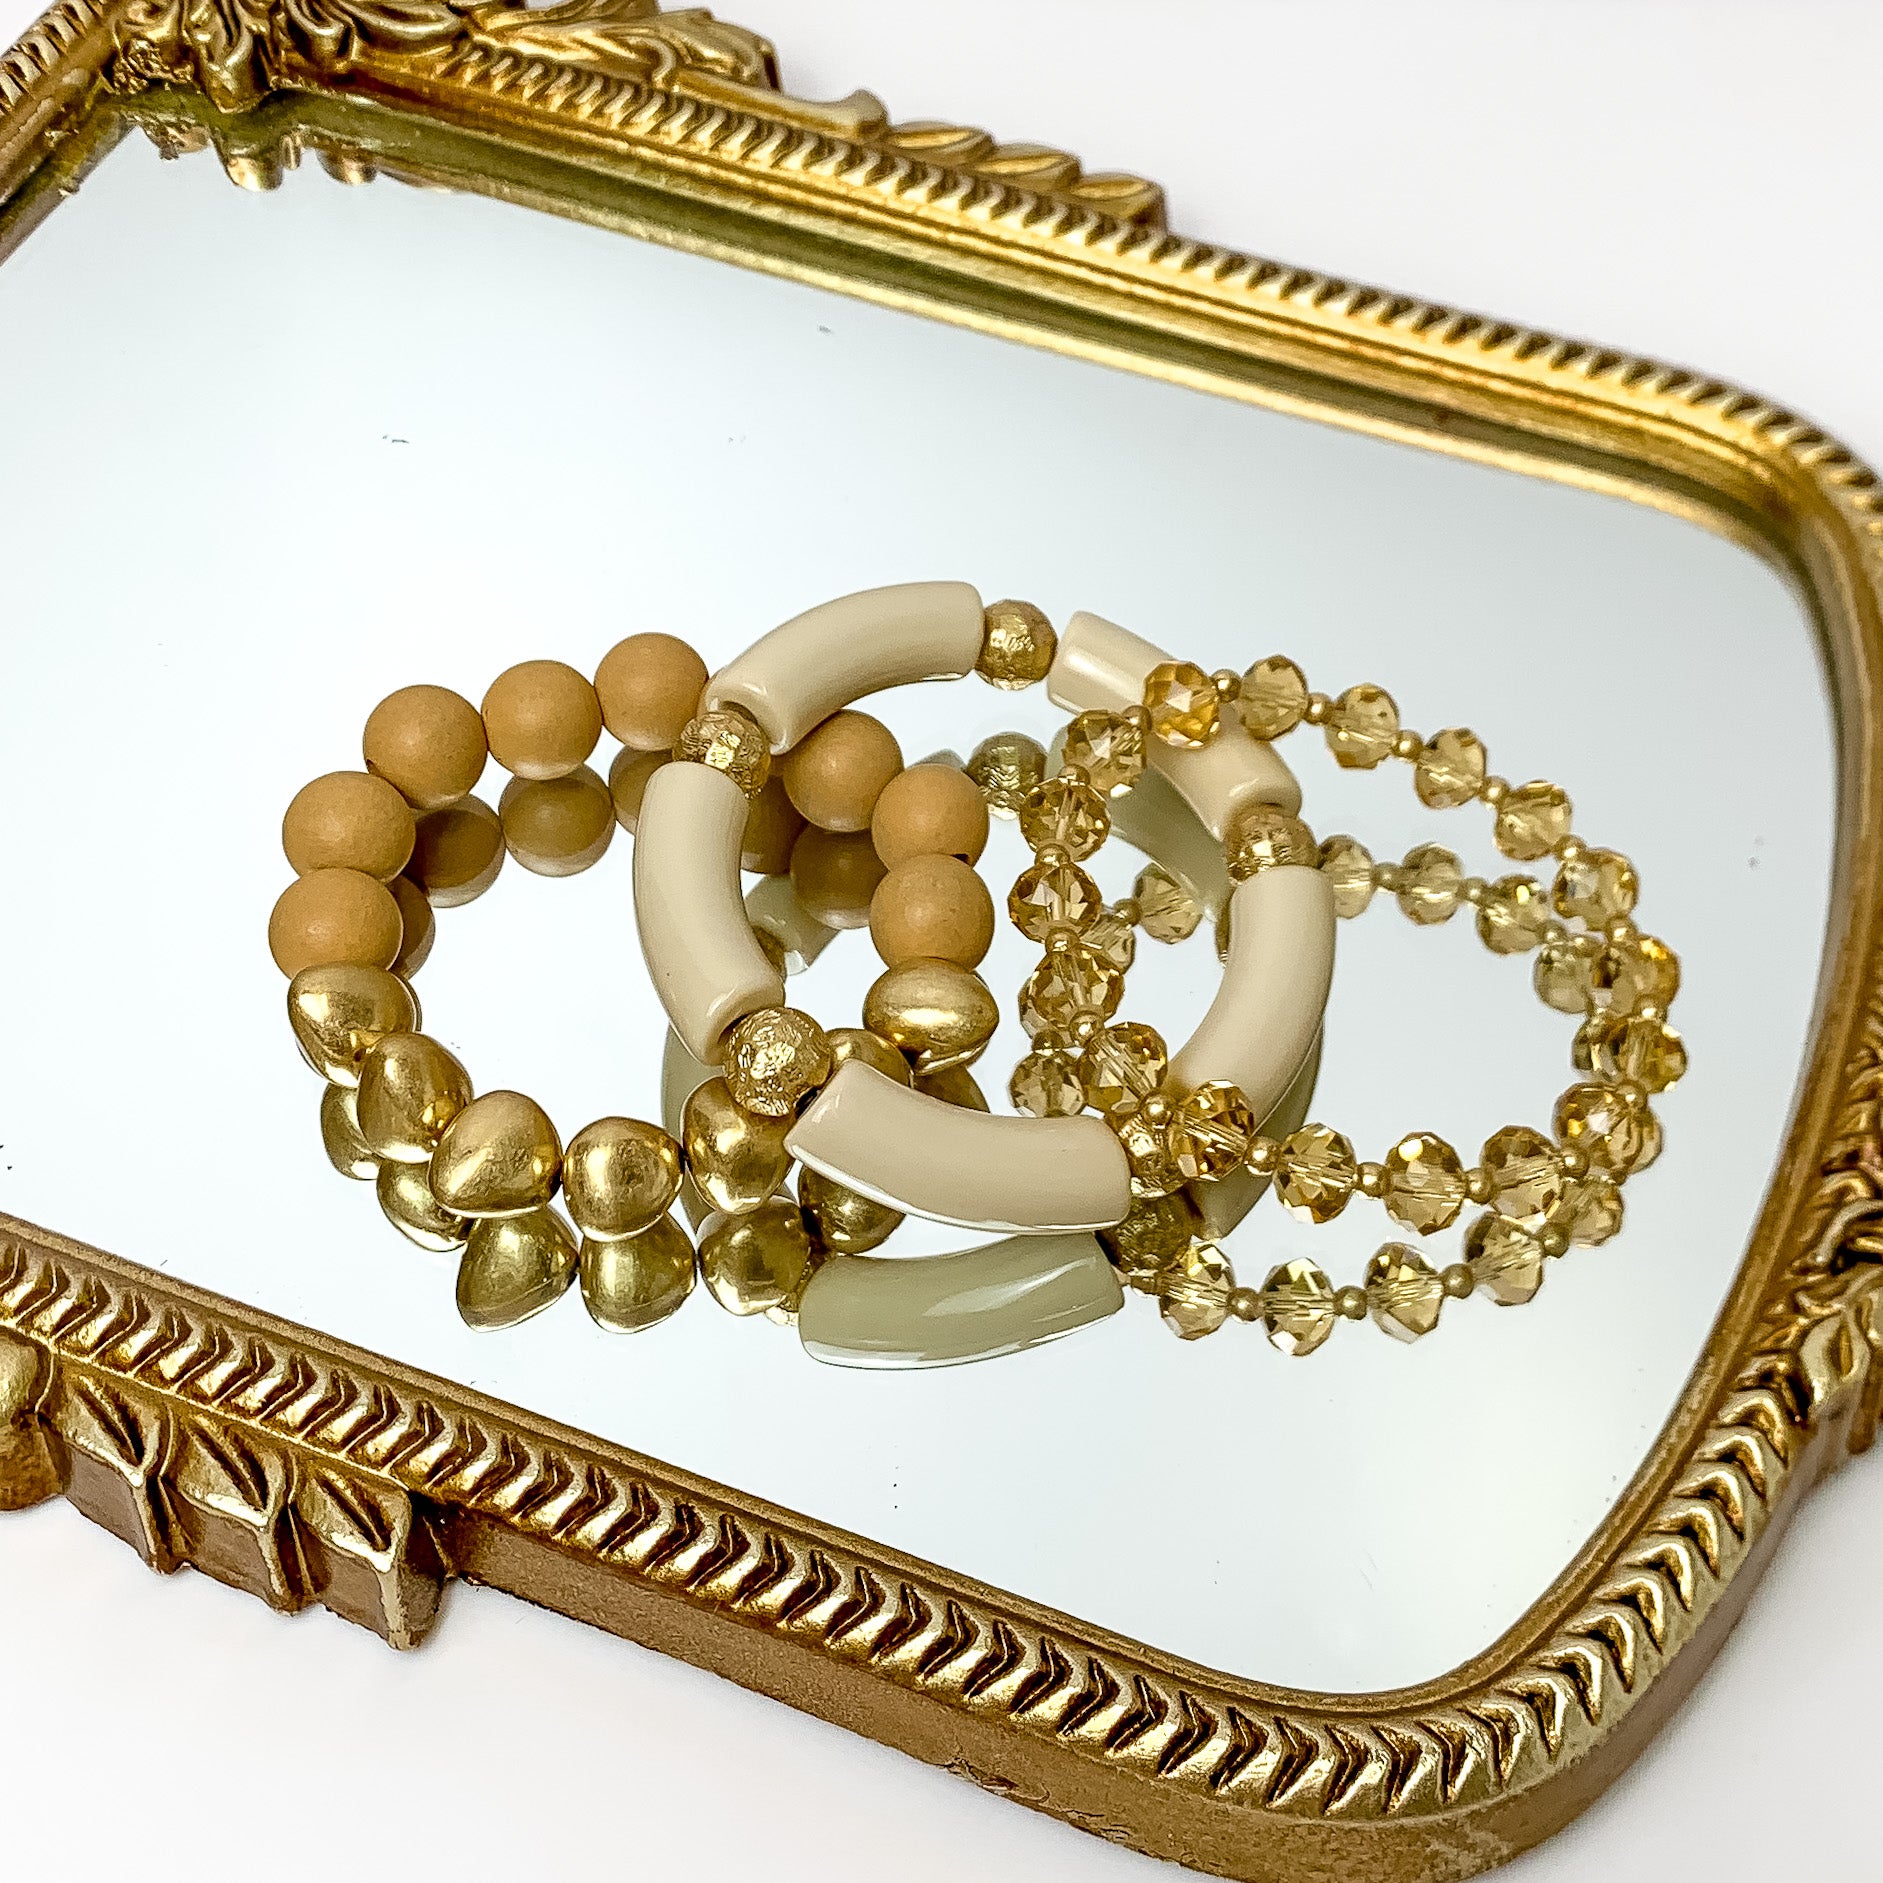 Set of Three | Island Dream Crystal and Marble Beaded Bracelet Set in Beige Brown. Pictured on a white background laying on a mirror with a gold trim.